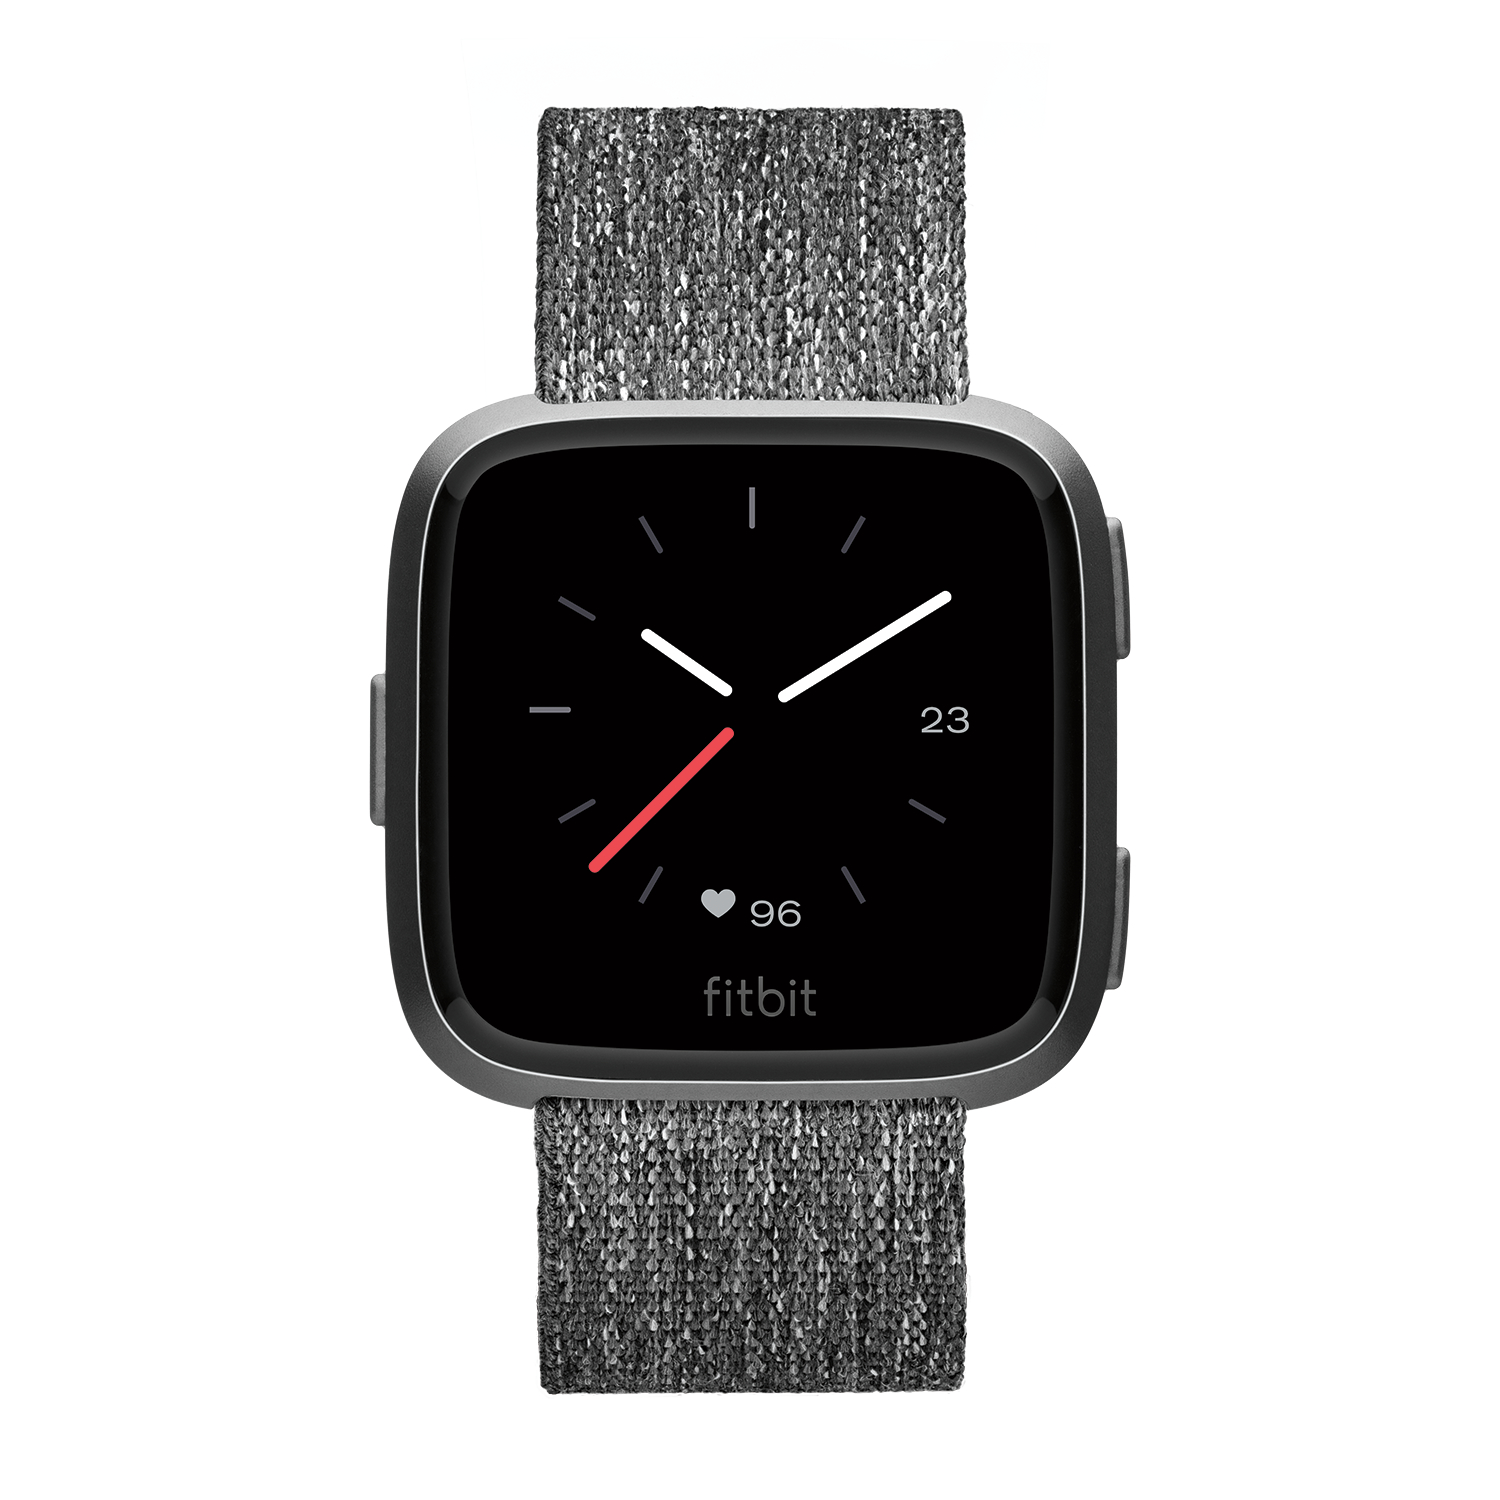 Fitbit Versa - Special Edition Smart Watch - image 3 of 6